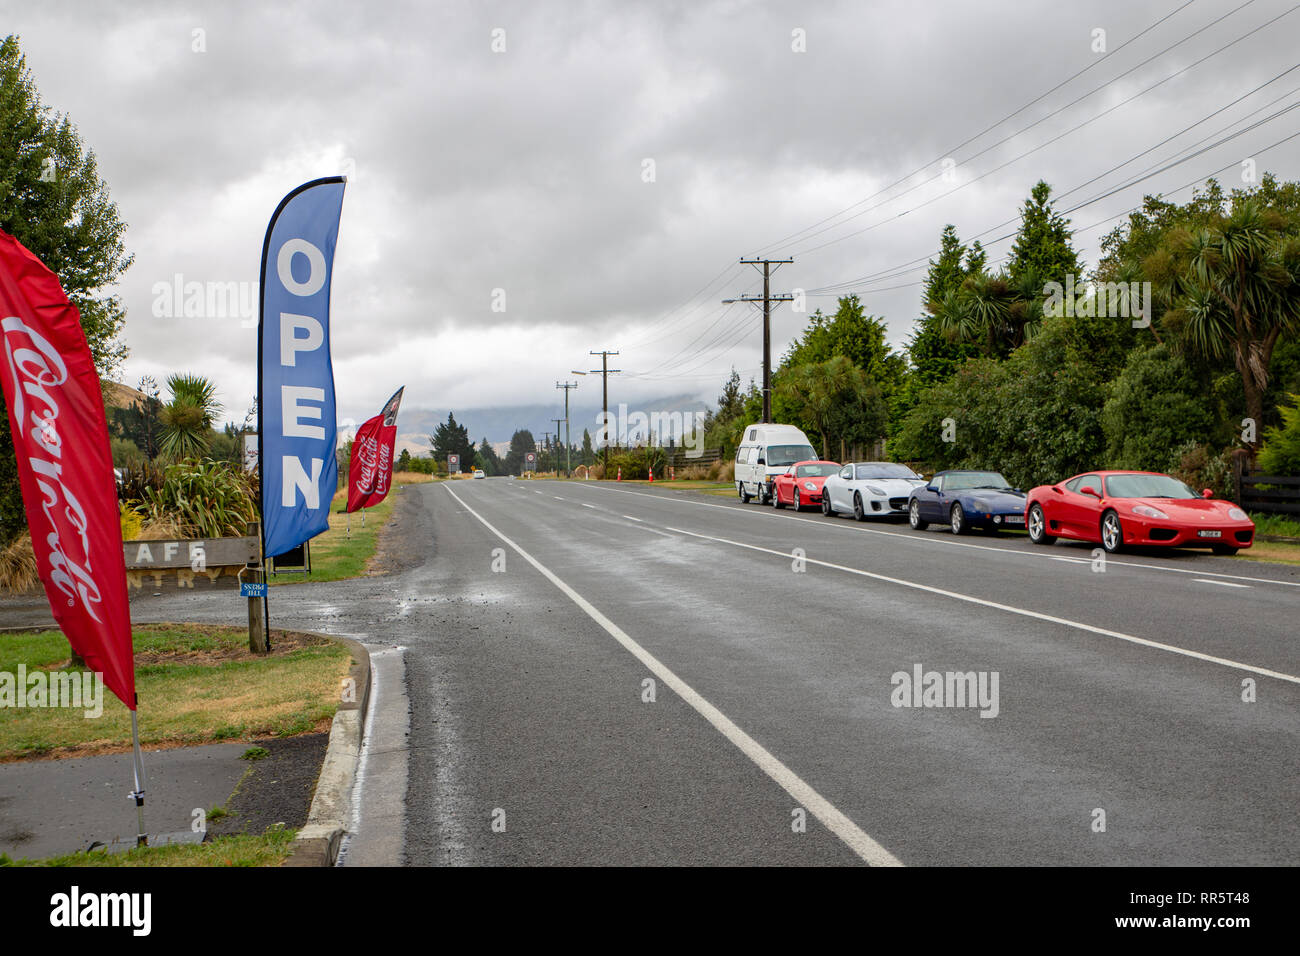 Springfield, Canterbury, New Zealand, February 24 2019: luxury cars parked along a main rural highway outside a cafe Stock Photo